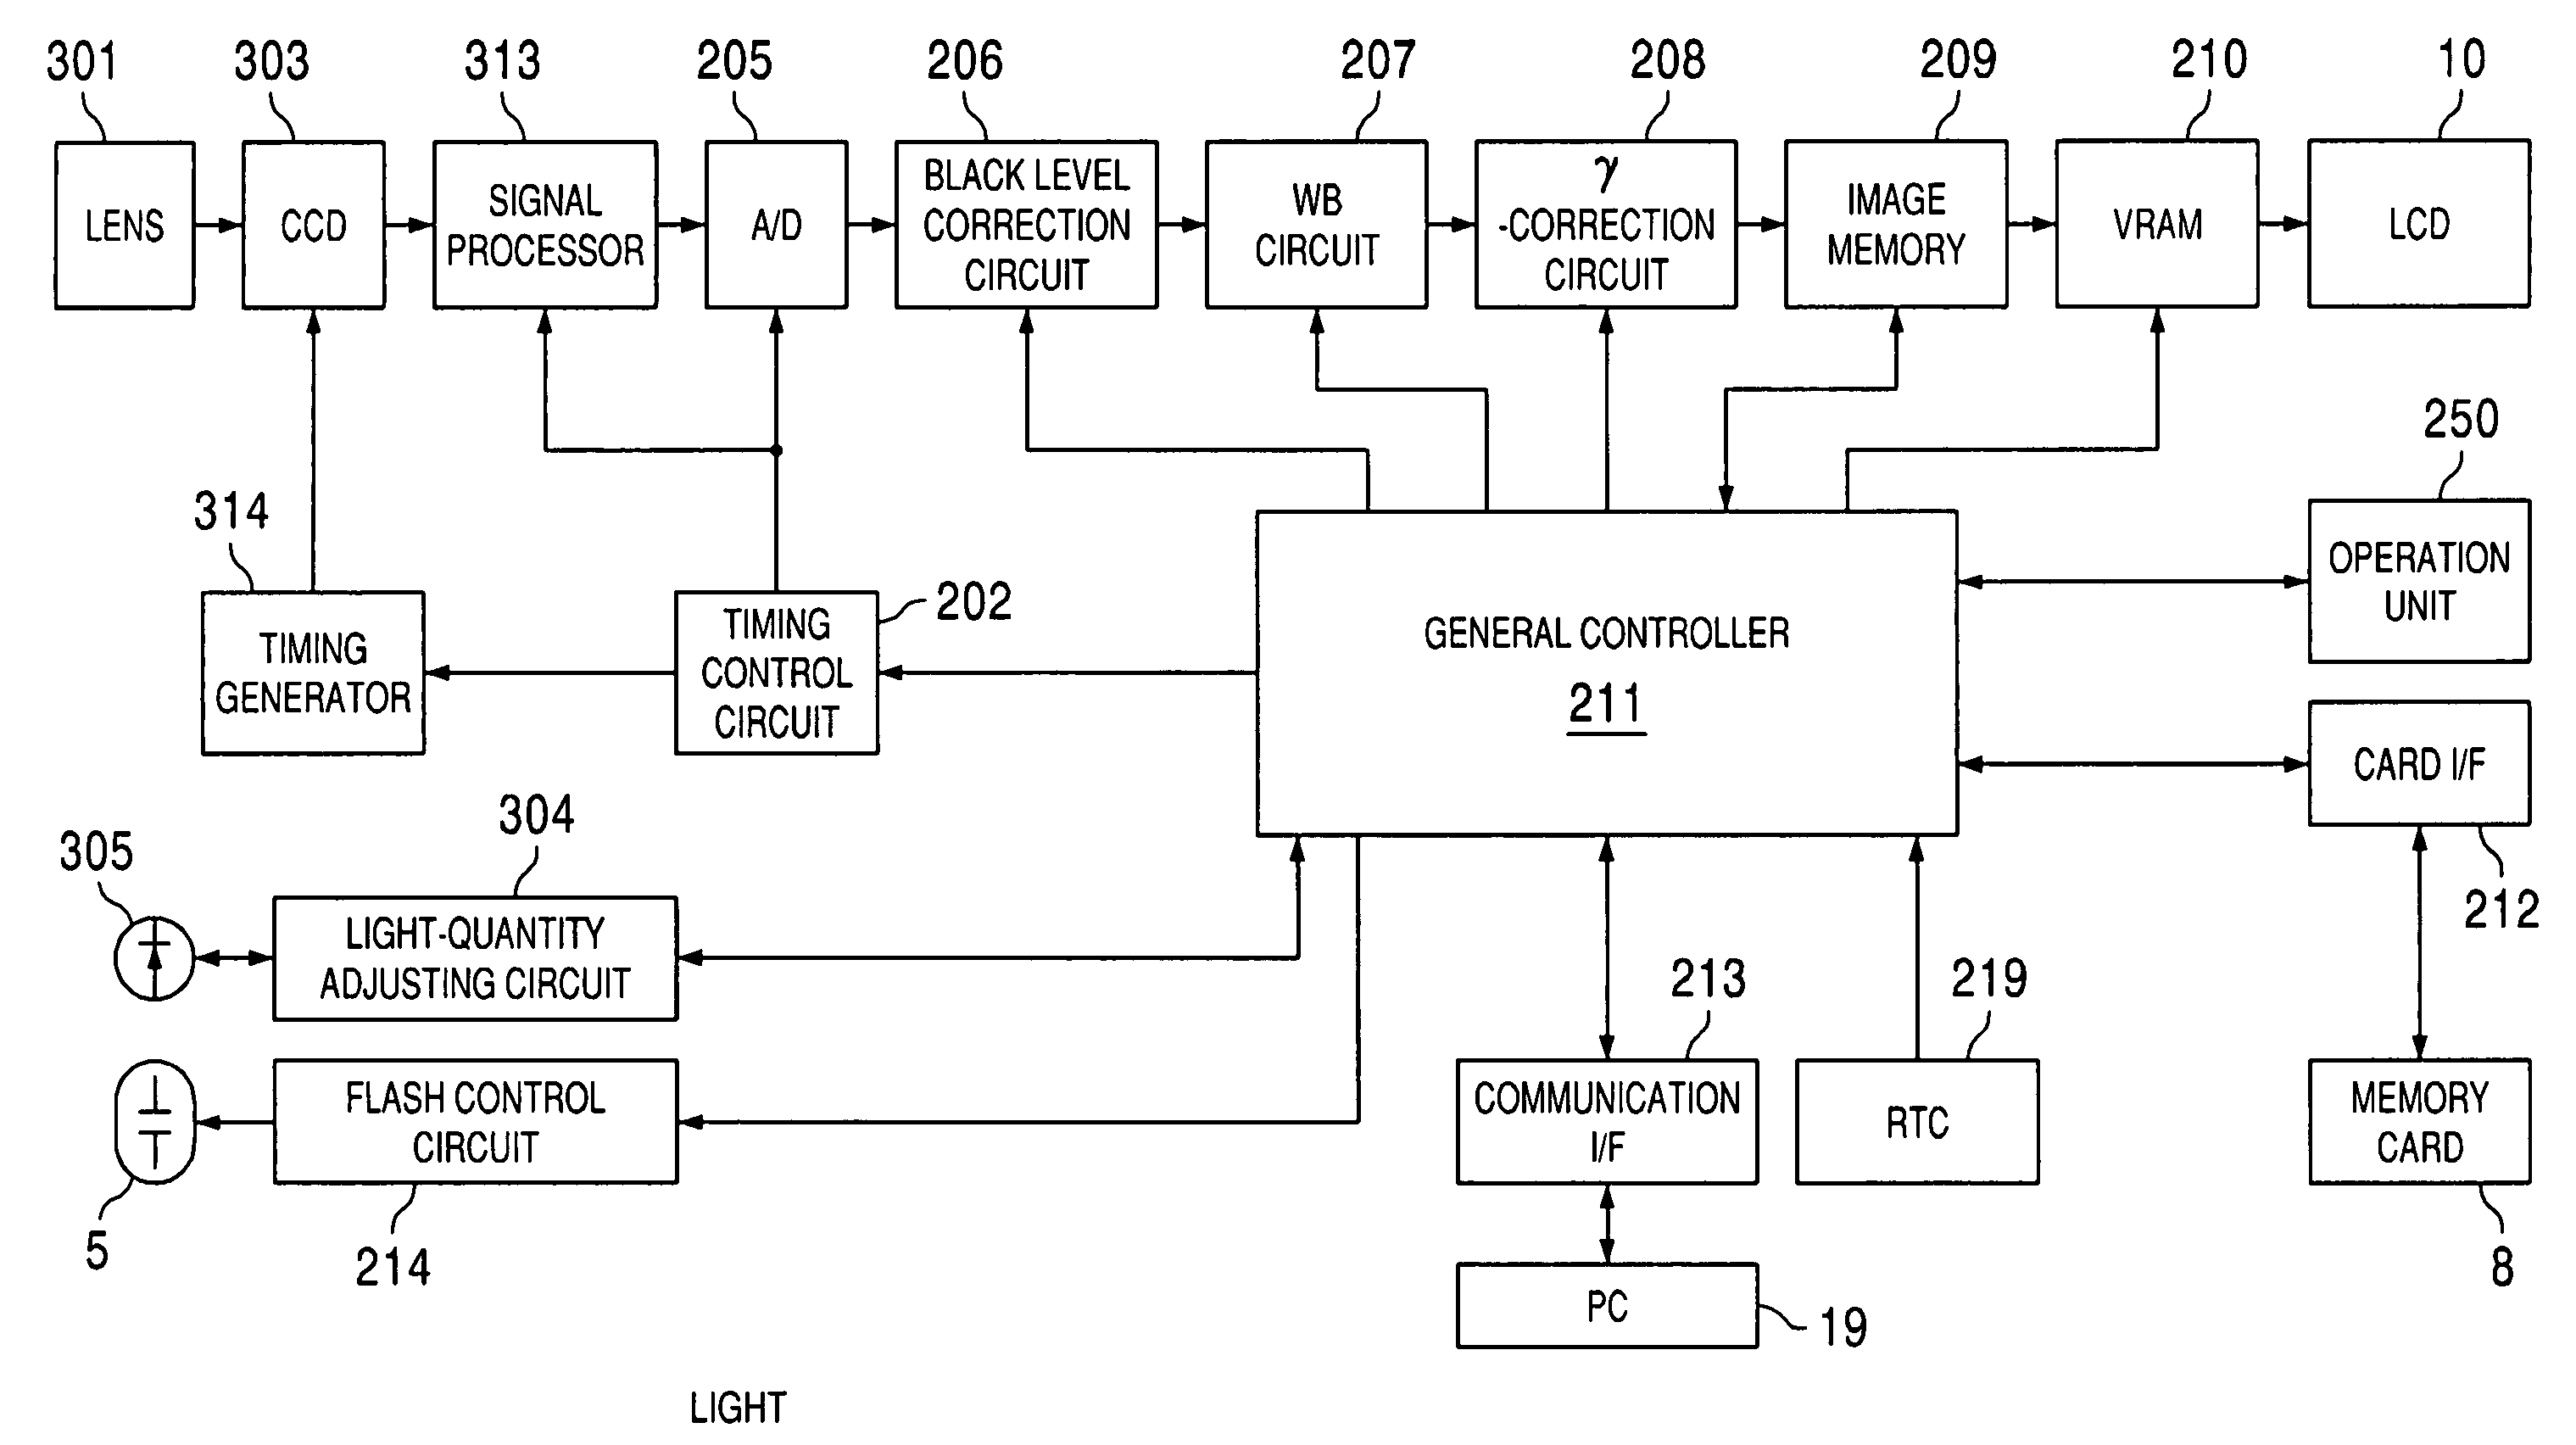 Digital camera having automatic exposure control for different photographing modes